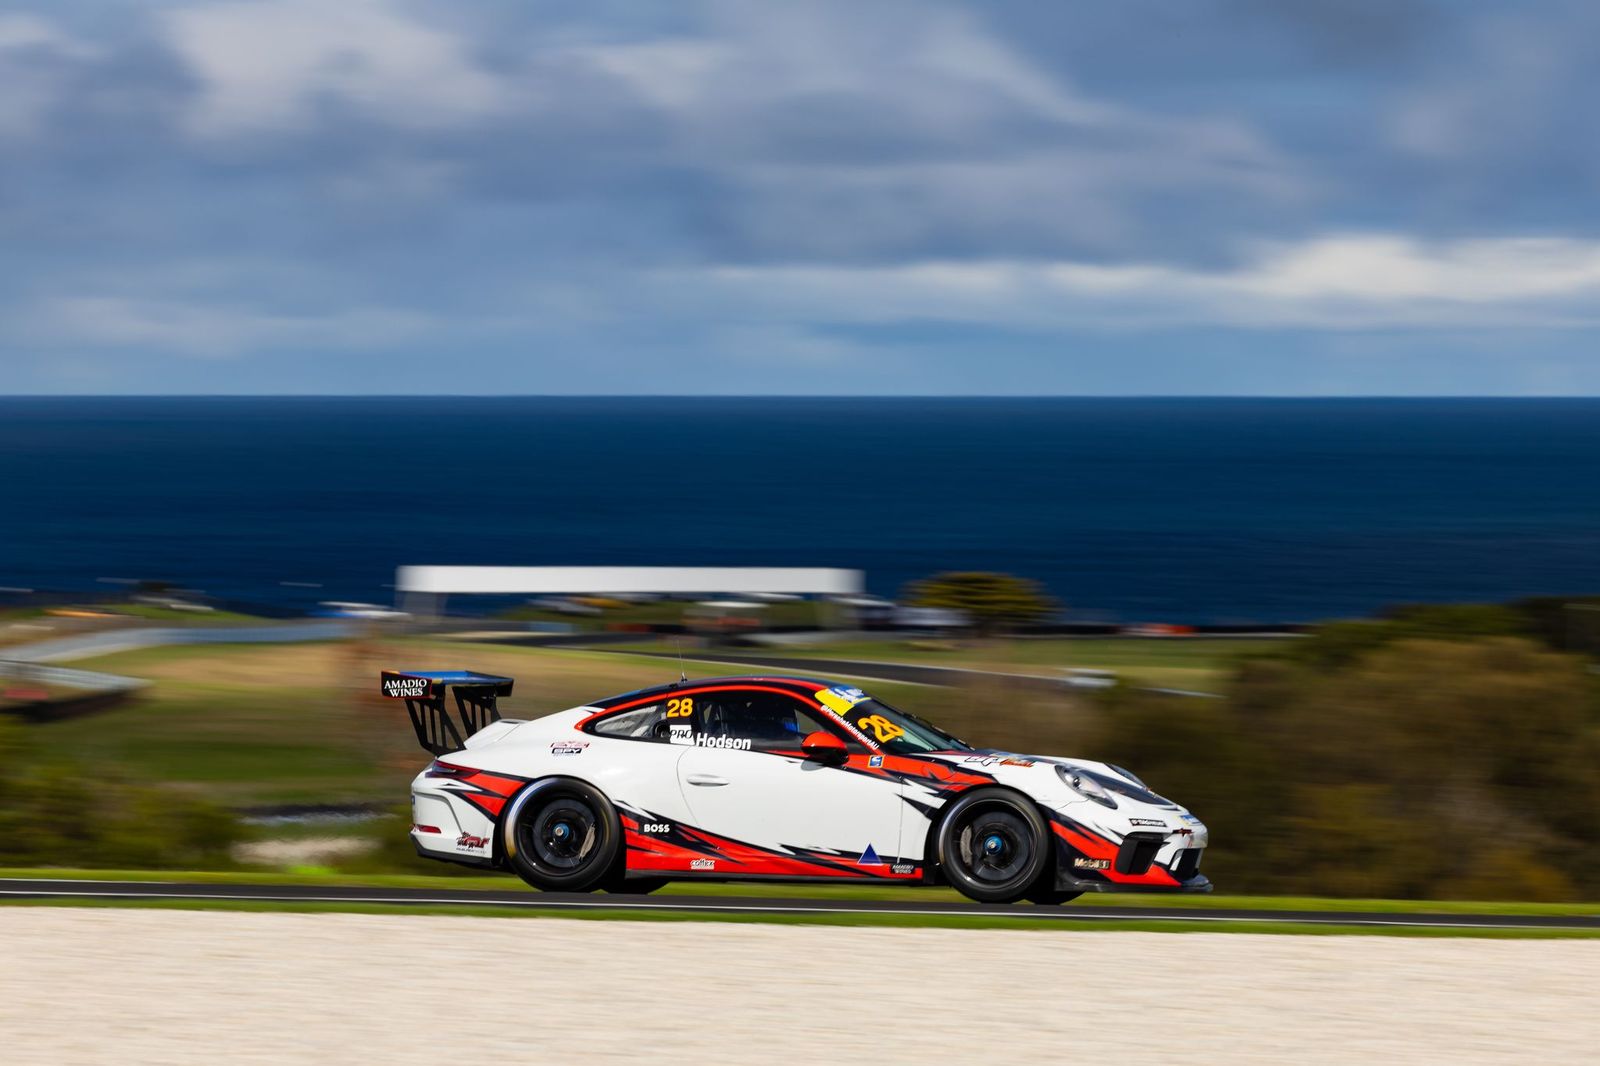 Ayrton Hodson with McElrea Racing in the Porsche Michelin Sprint Challenge at Phillip Island 2024